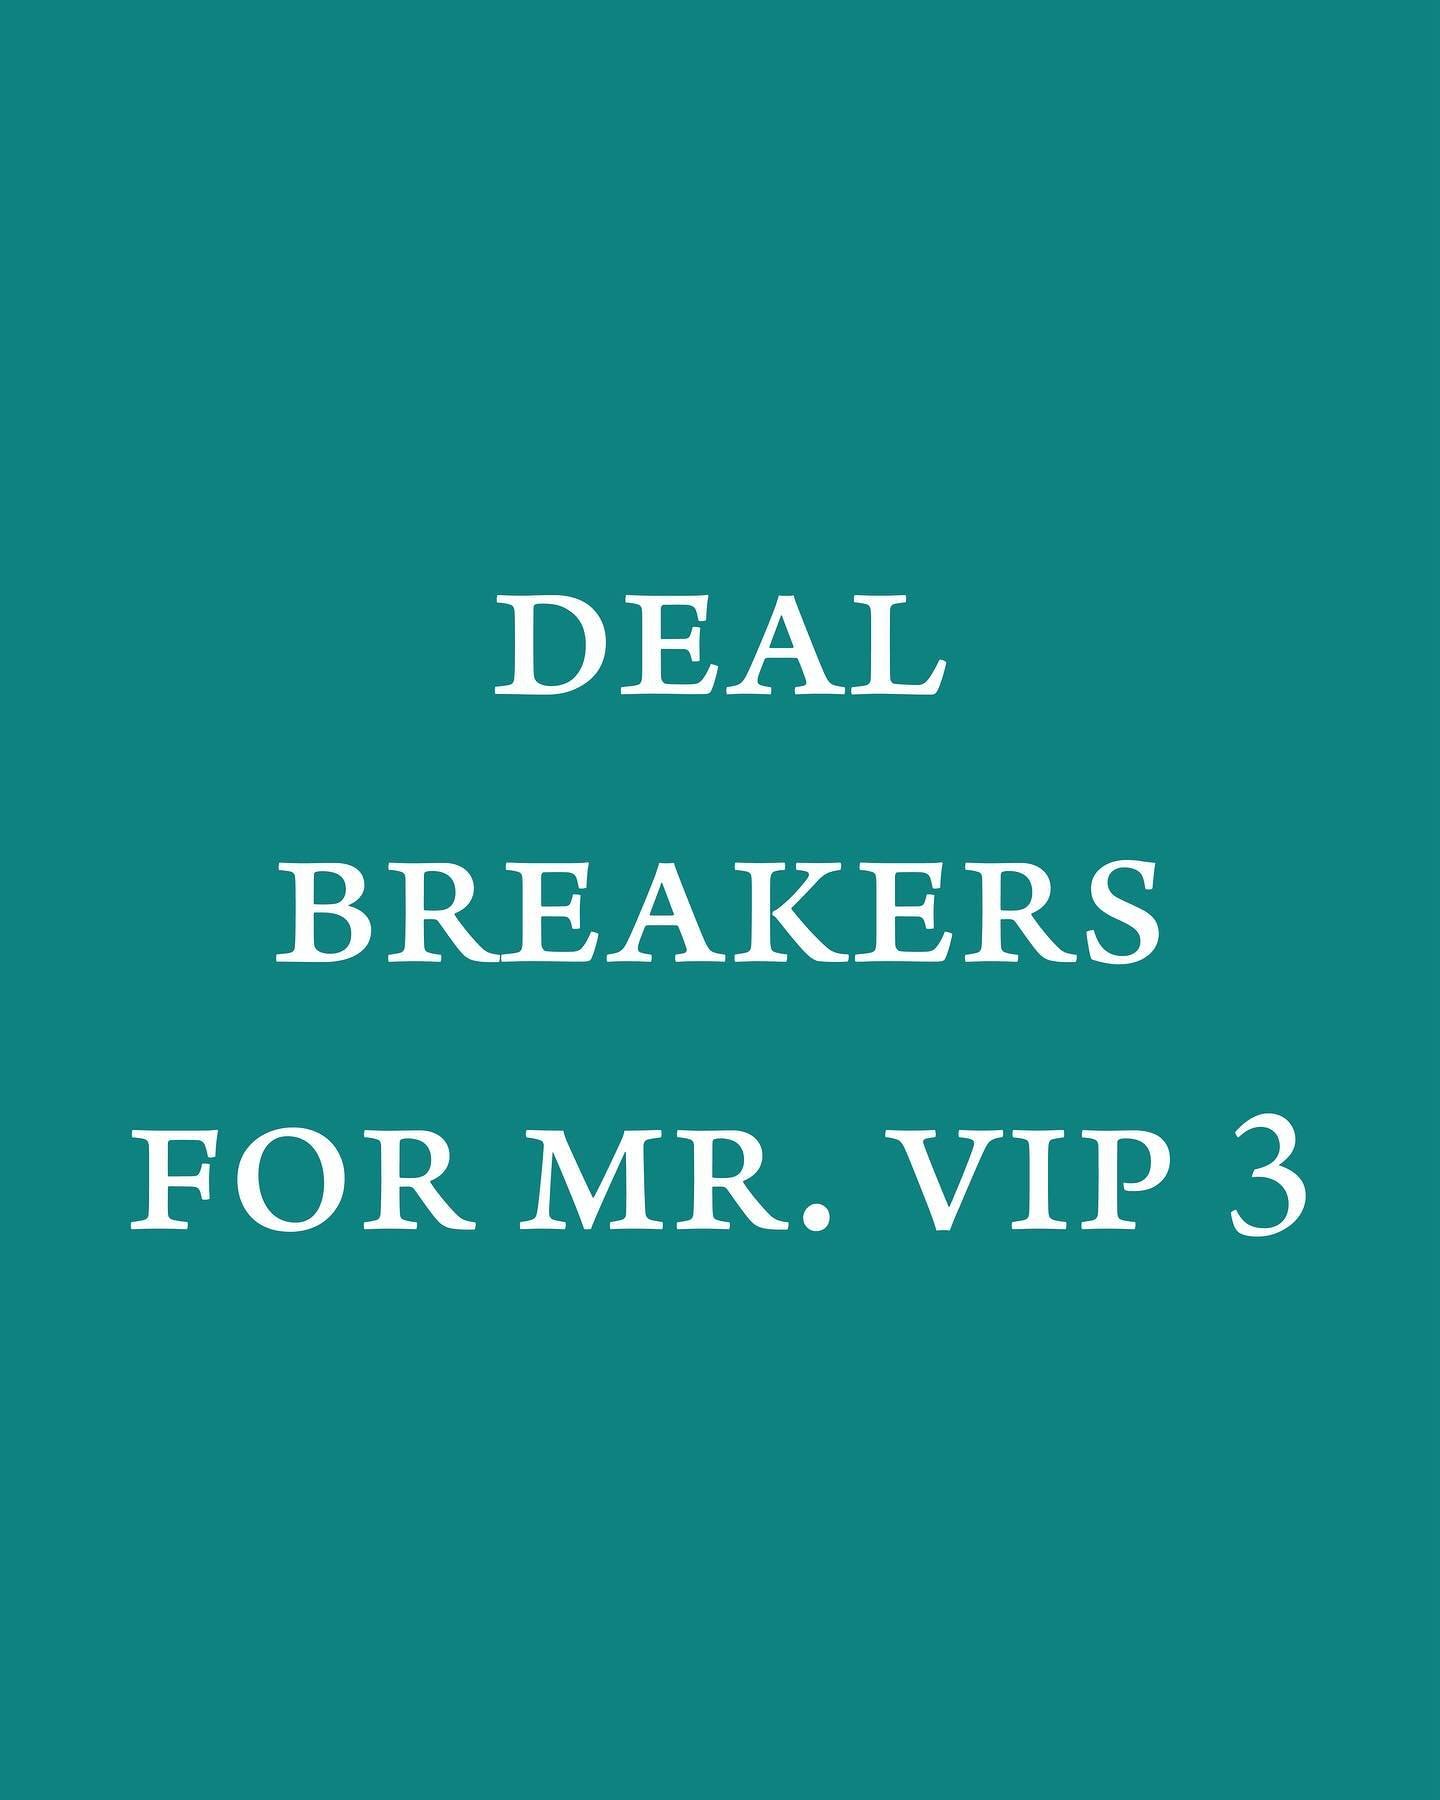 Discussing deal breakers in the early stages of a relationship is a key part of creating a healthy and happy long-term relationship. Today, we are talking about our Mr. VIP 3&rsquo;s deal breakers!
.
.
.
.
.
#newbachelor #charismatic #datewithintenti